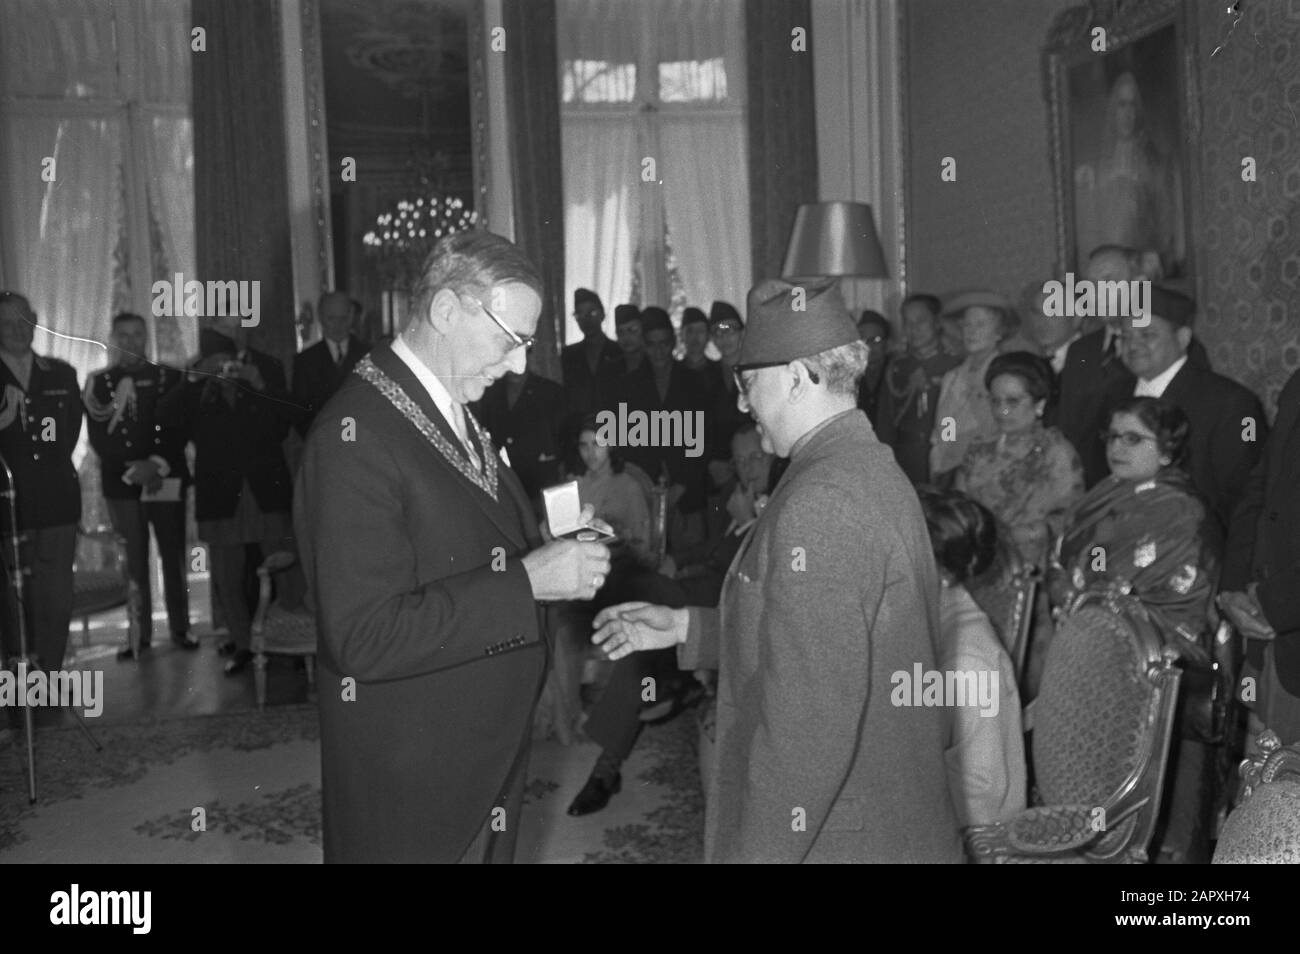 State visit Queen and King of Nepal to Amsterdam, Mayor Van Hall gives badge of the city to King of Nepal Date: April 25, 1967 Location: Amsterdam, Nepal Keywords: STAD, kings, queens, state visits Personal name: Hall, Gijs van Stock Photo